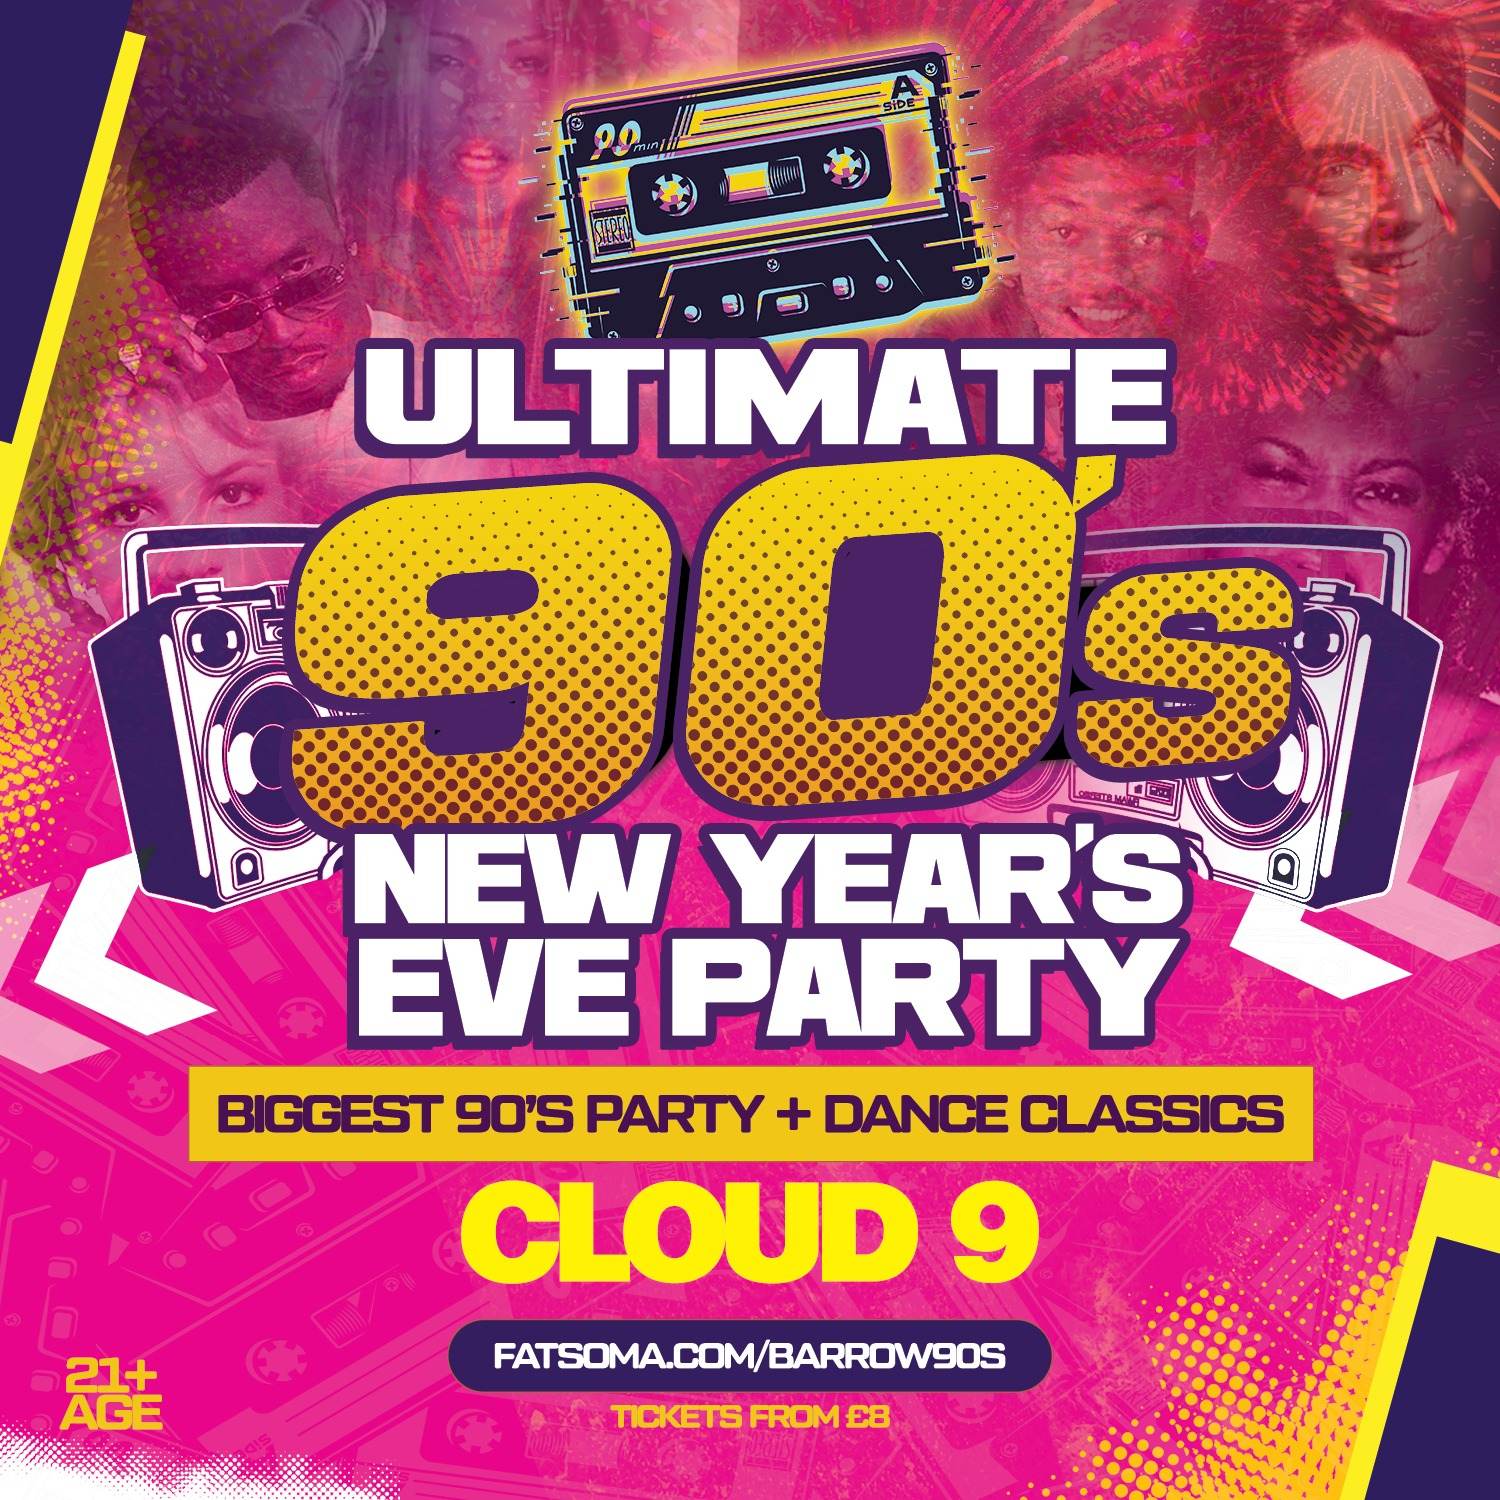 Ultimate 90's New Year's Eve Party @ Cloud 9